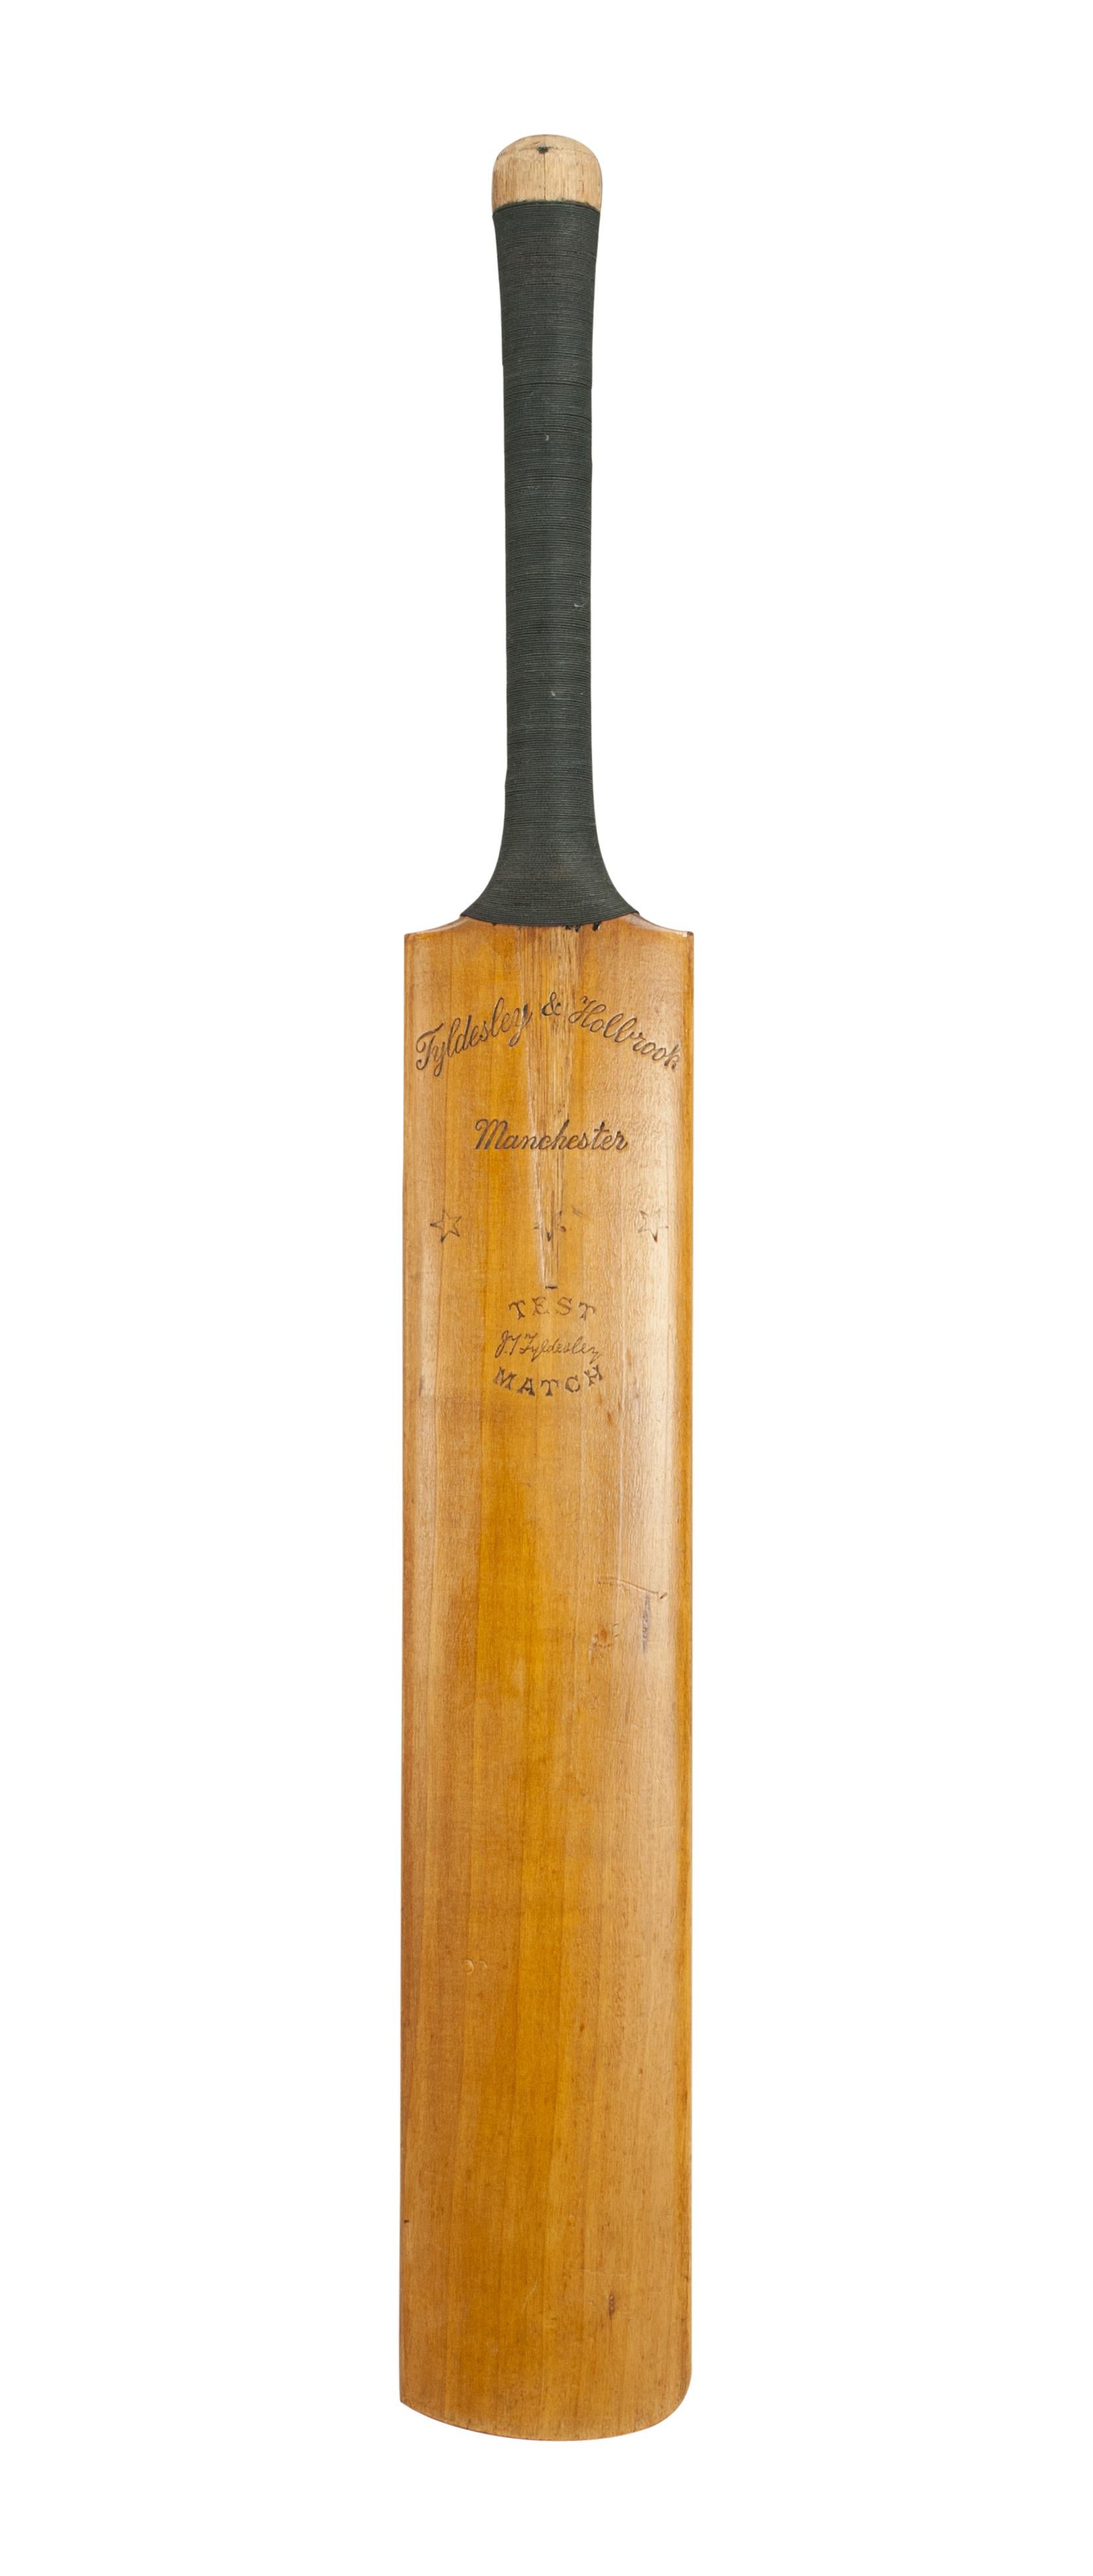 A good Tyldesley & Holbrook cricket bat signed by the 1939 West Indies v England Cricket Teams. The rear of the bat is signed by both teams to the spine in ink with the innings of the match played at Old Trafford. The signatures are clear and